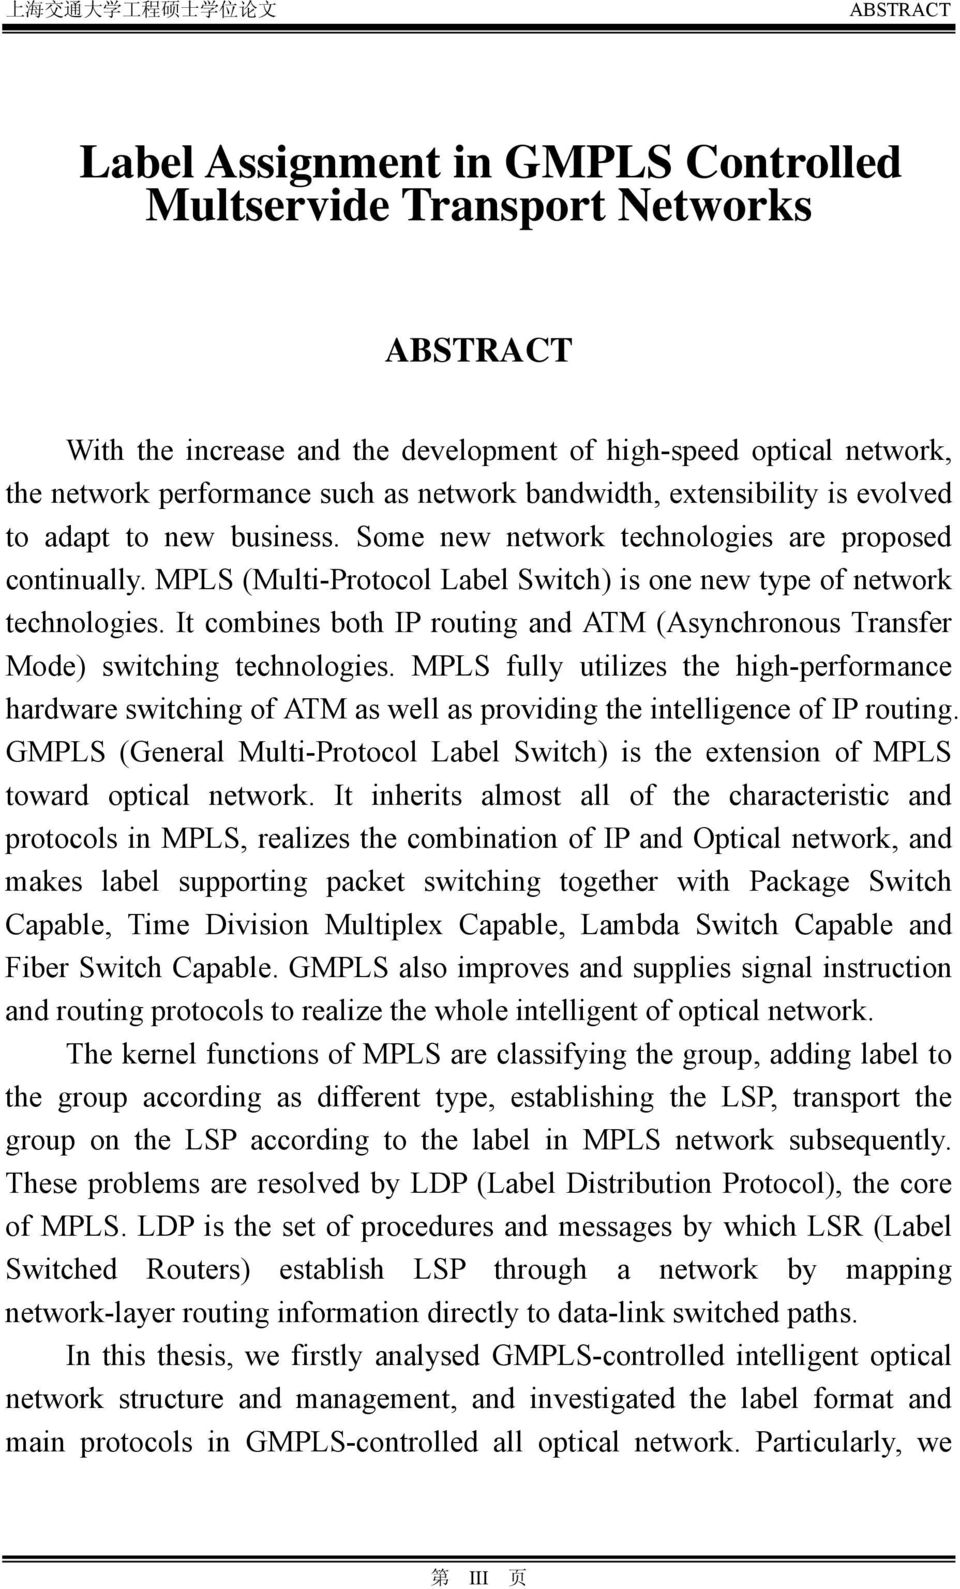 MPLS (Multi-Protocol Label Switch) is one new type of network technologies. It combines both IP routing and ATM (Asynchronous Transfer Mode) switching technologies.